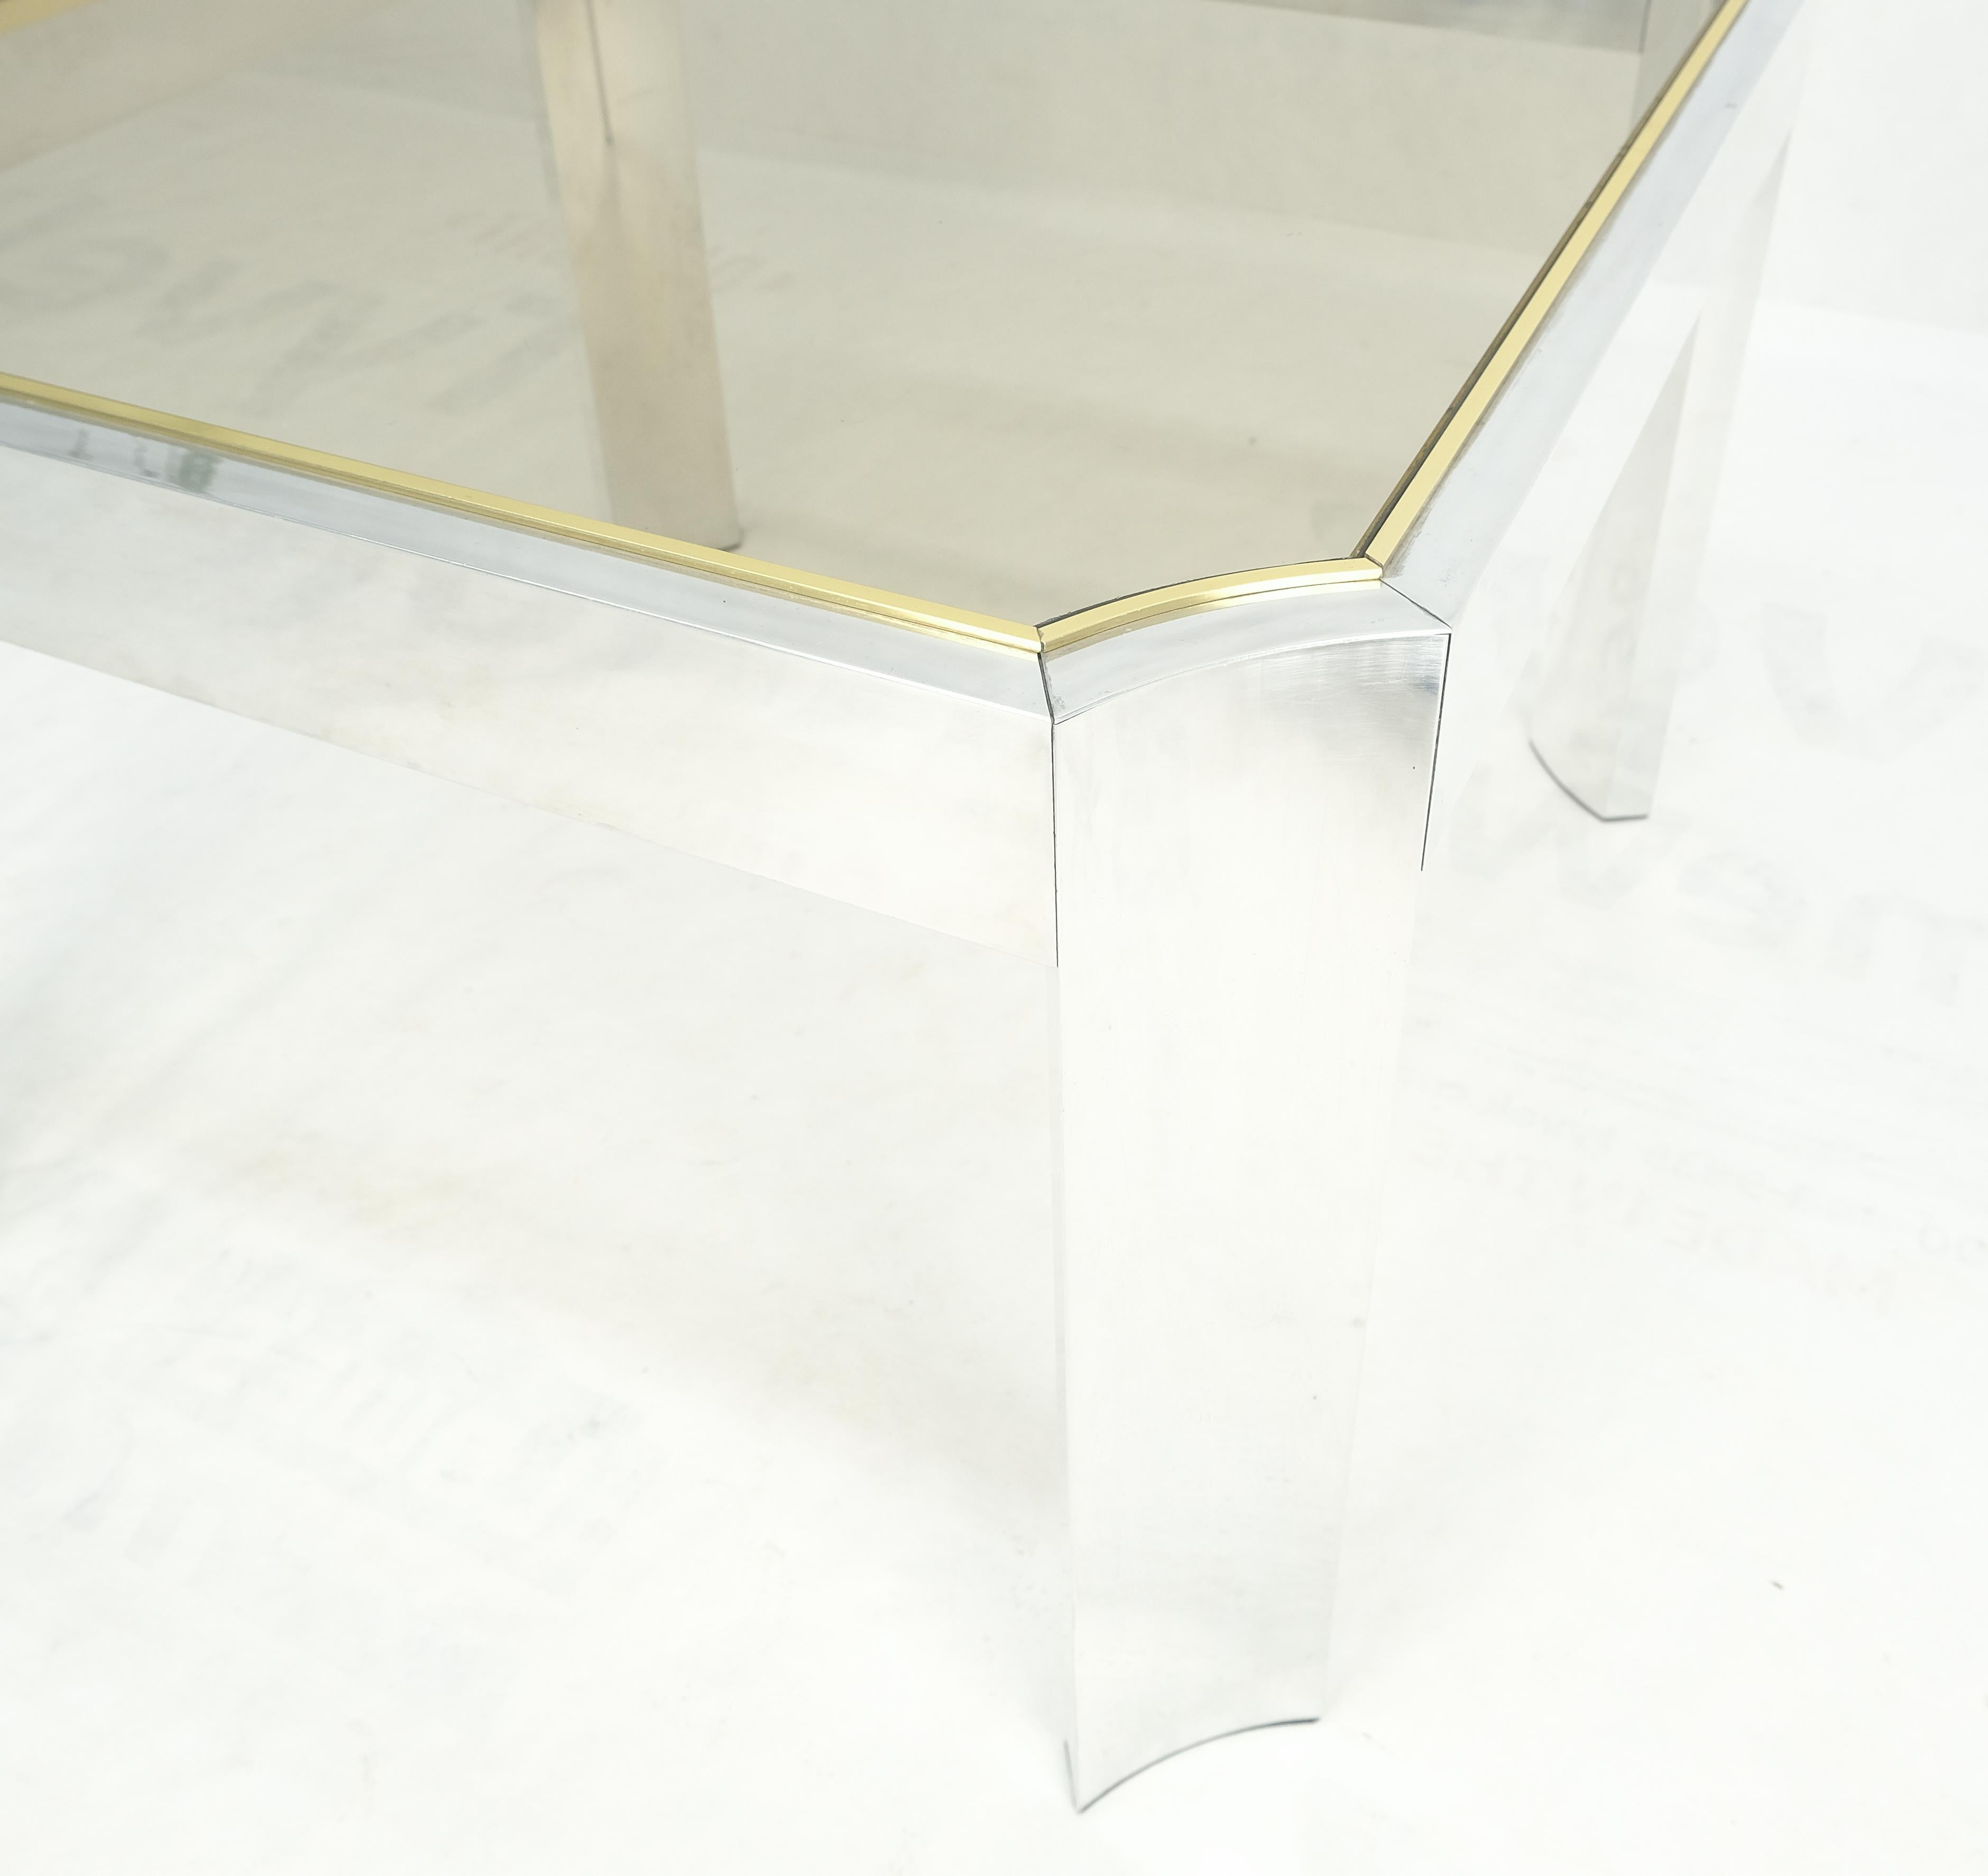 Polished Aluminum Profile Brass Basel Smoked Glass Top Square Coffee Table MINT! In Excellent Condition For Sale In Rockaway, NJ